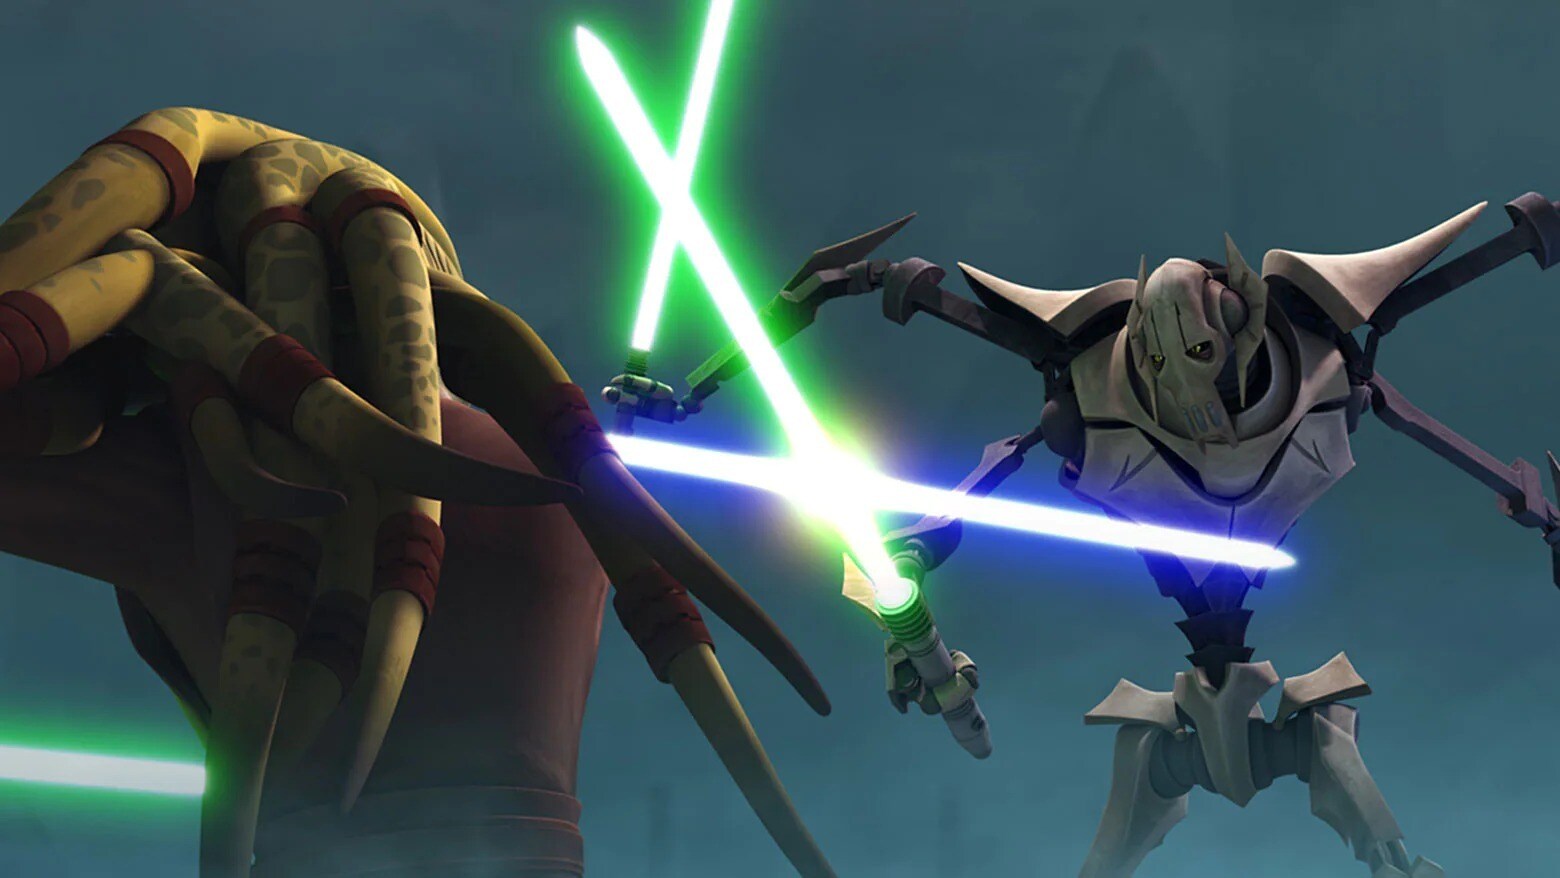 General Grievous' Lightsabers: Image Gallery (List View)